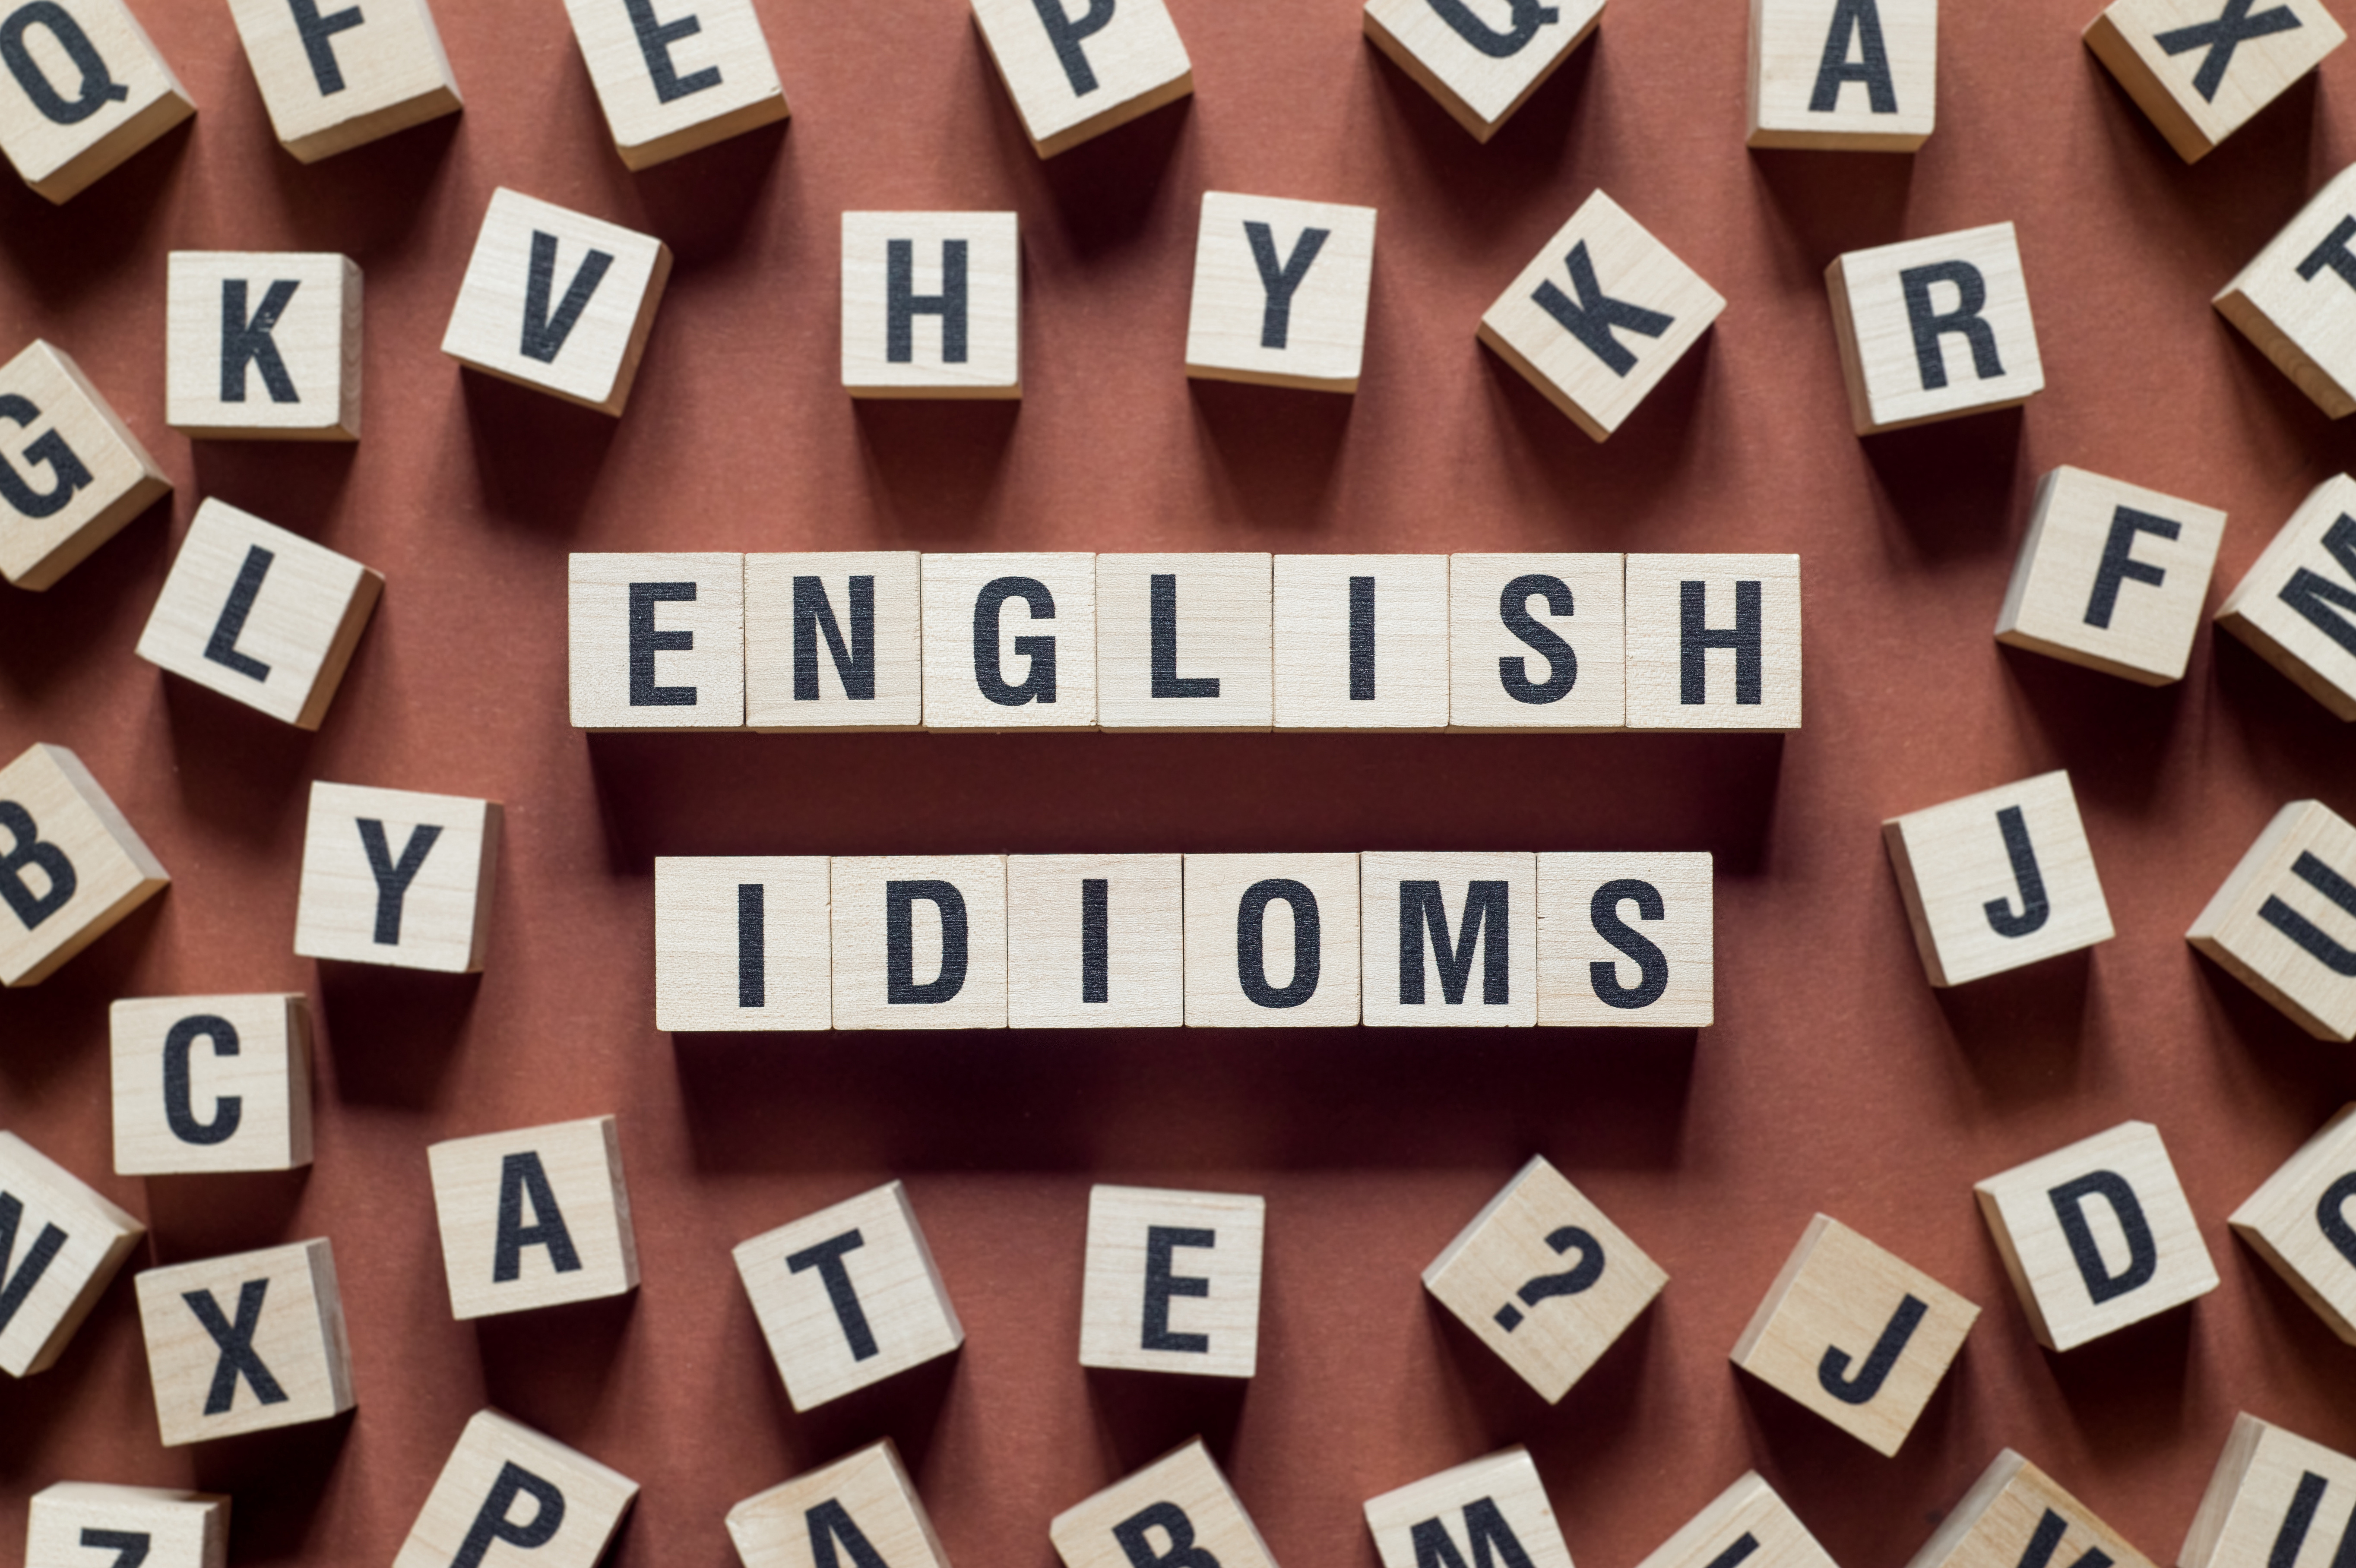 Idiom: Definition, Types, and Uses